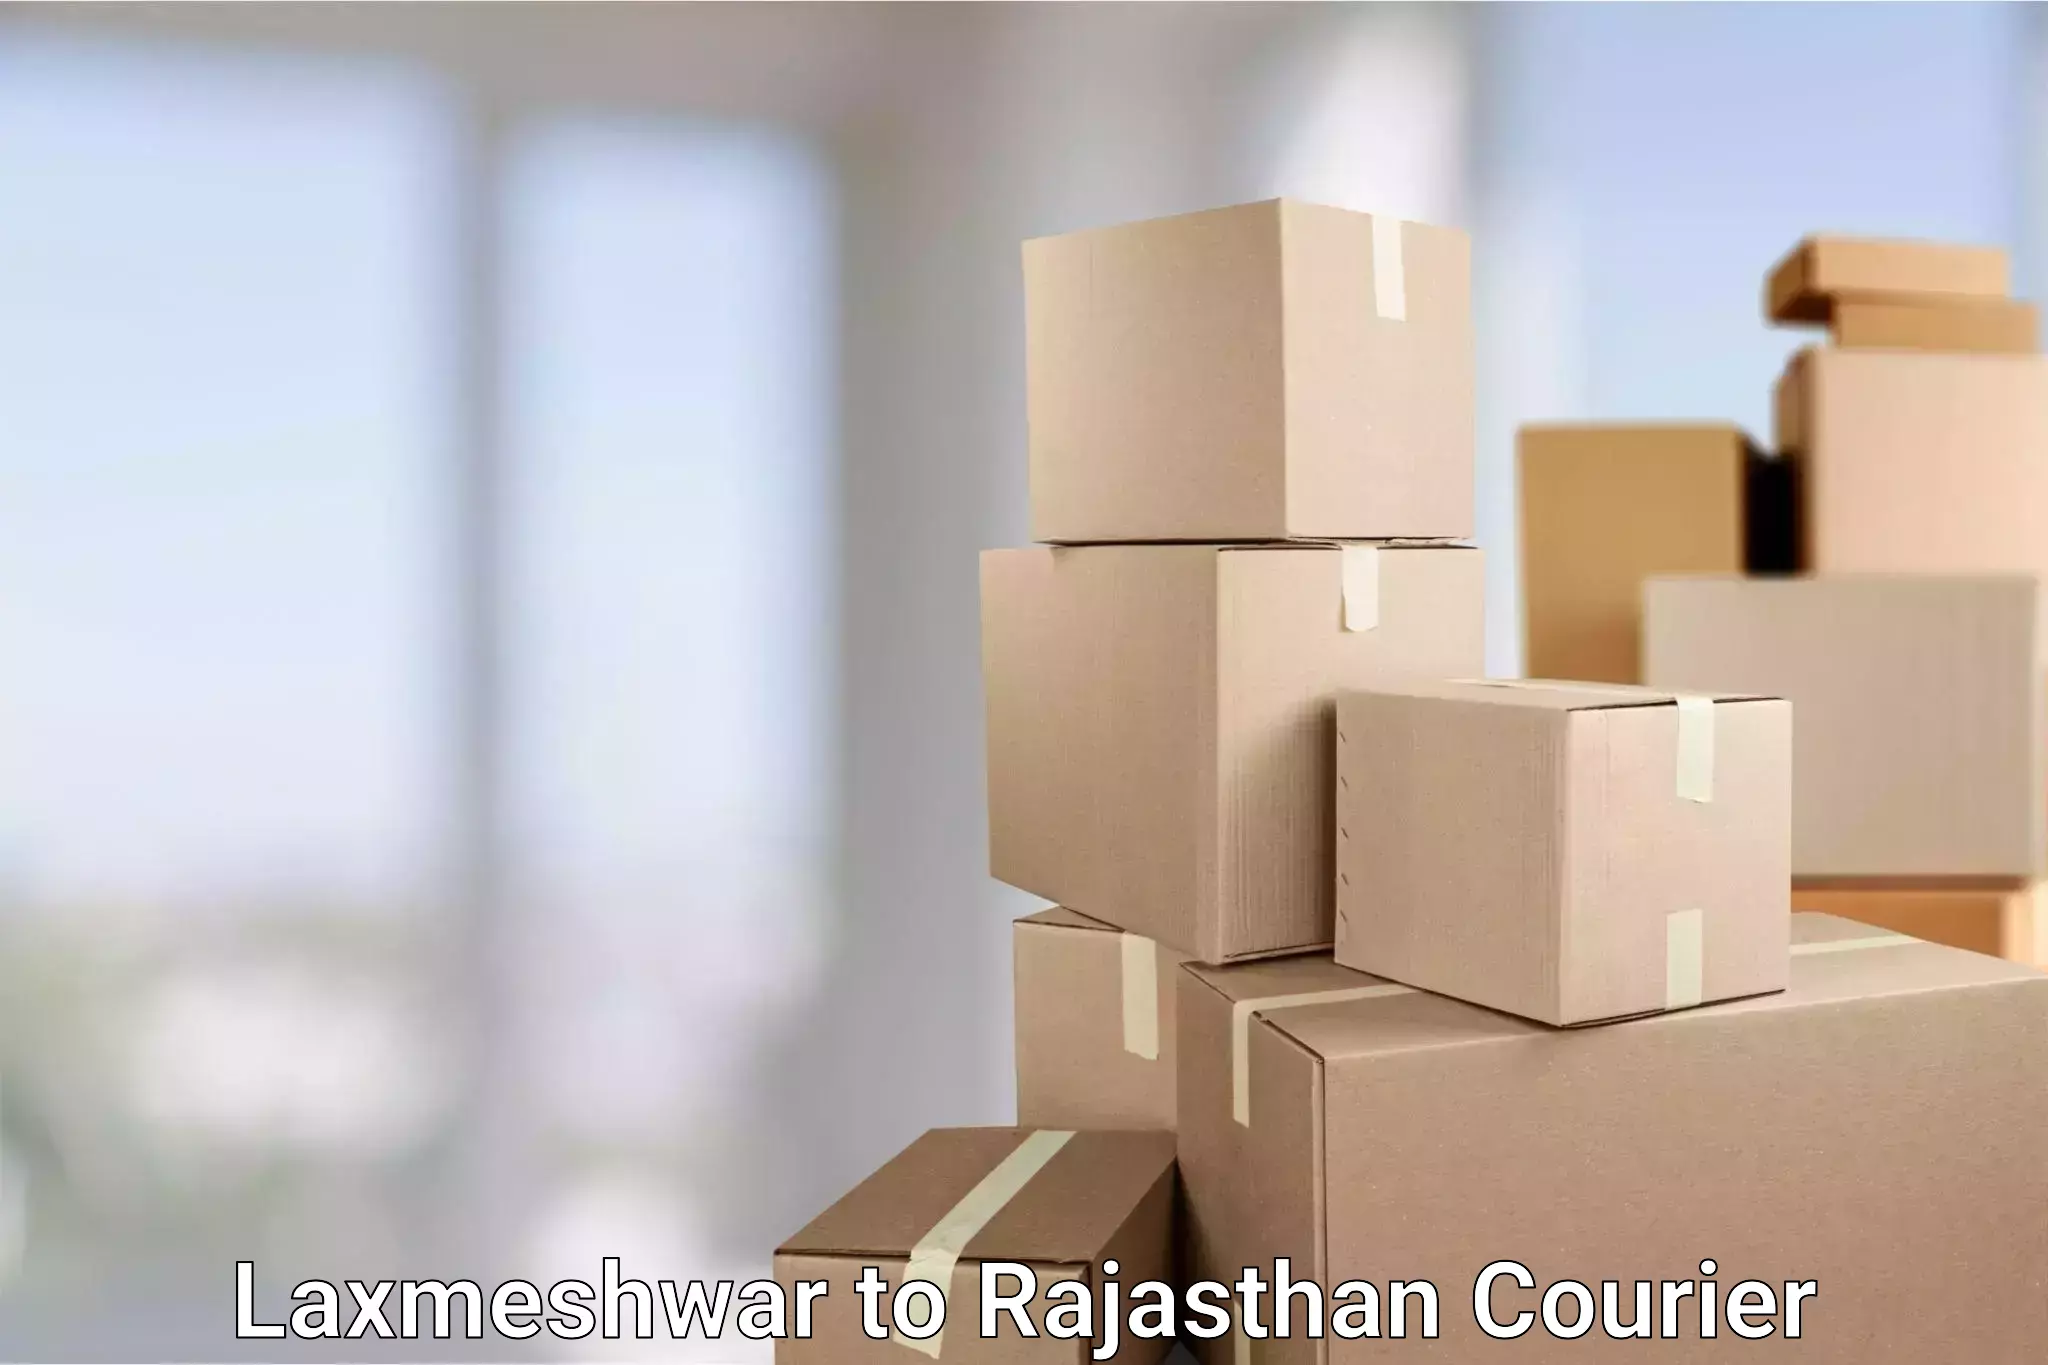 High value parcel delivery in Laxmeshwar to Lohawat